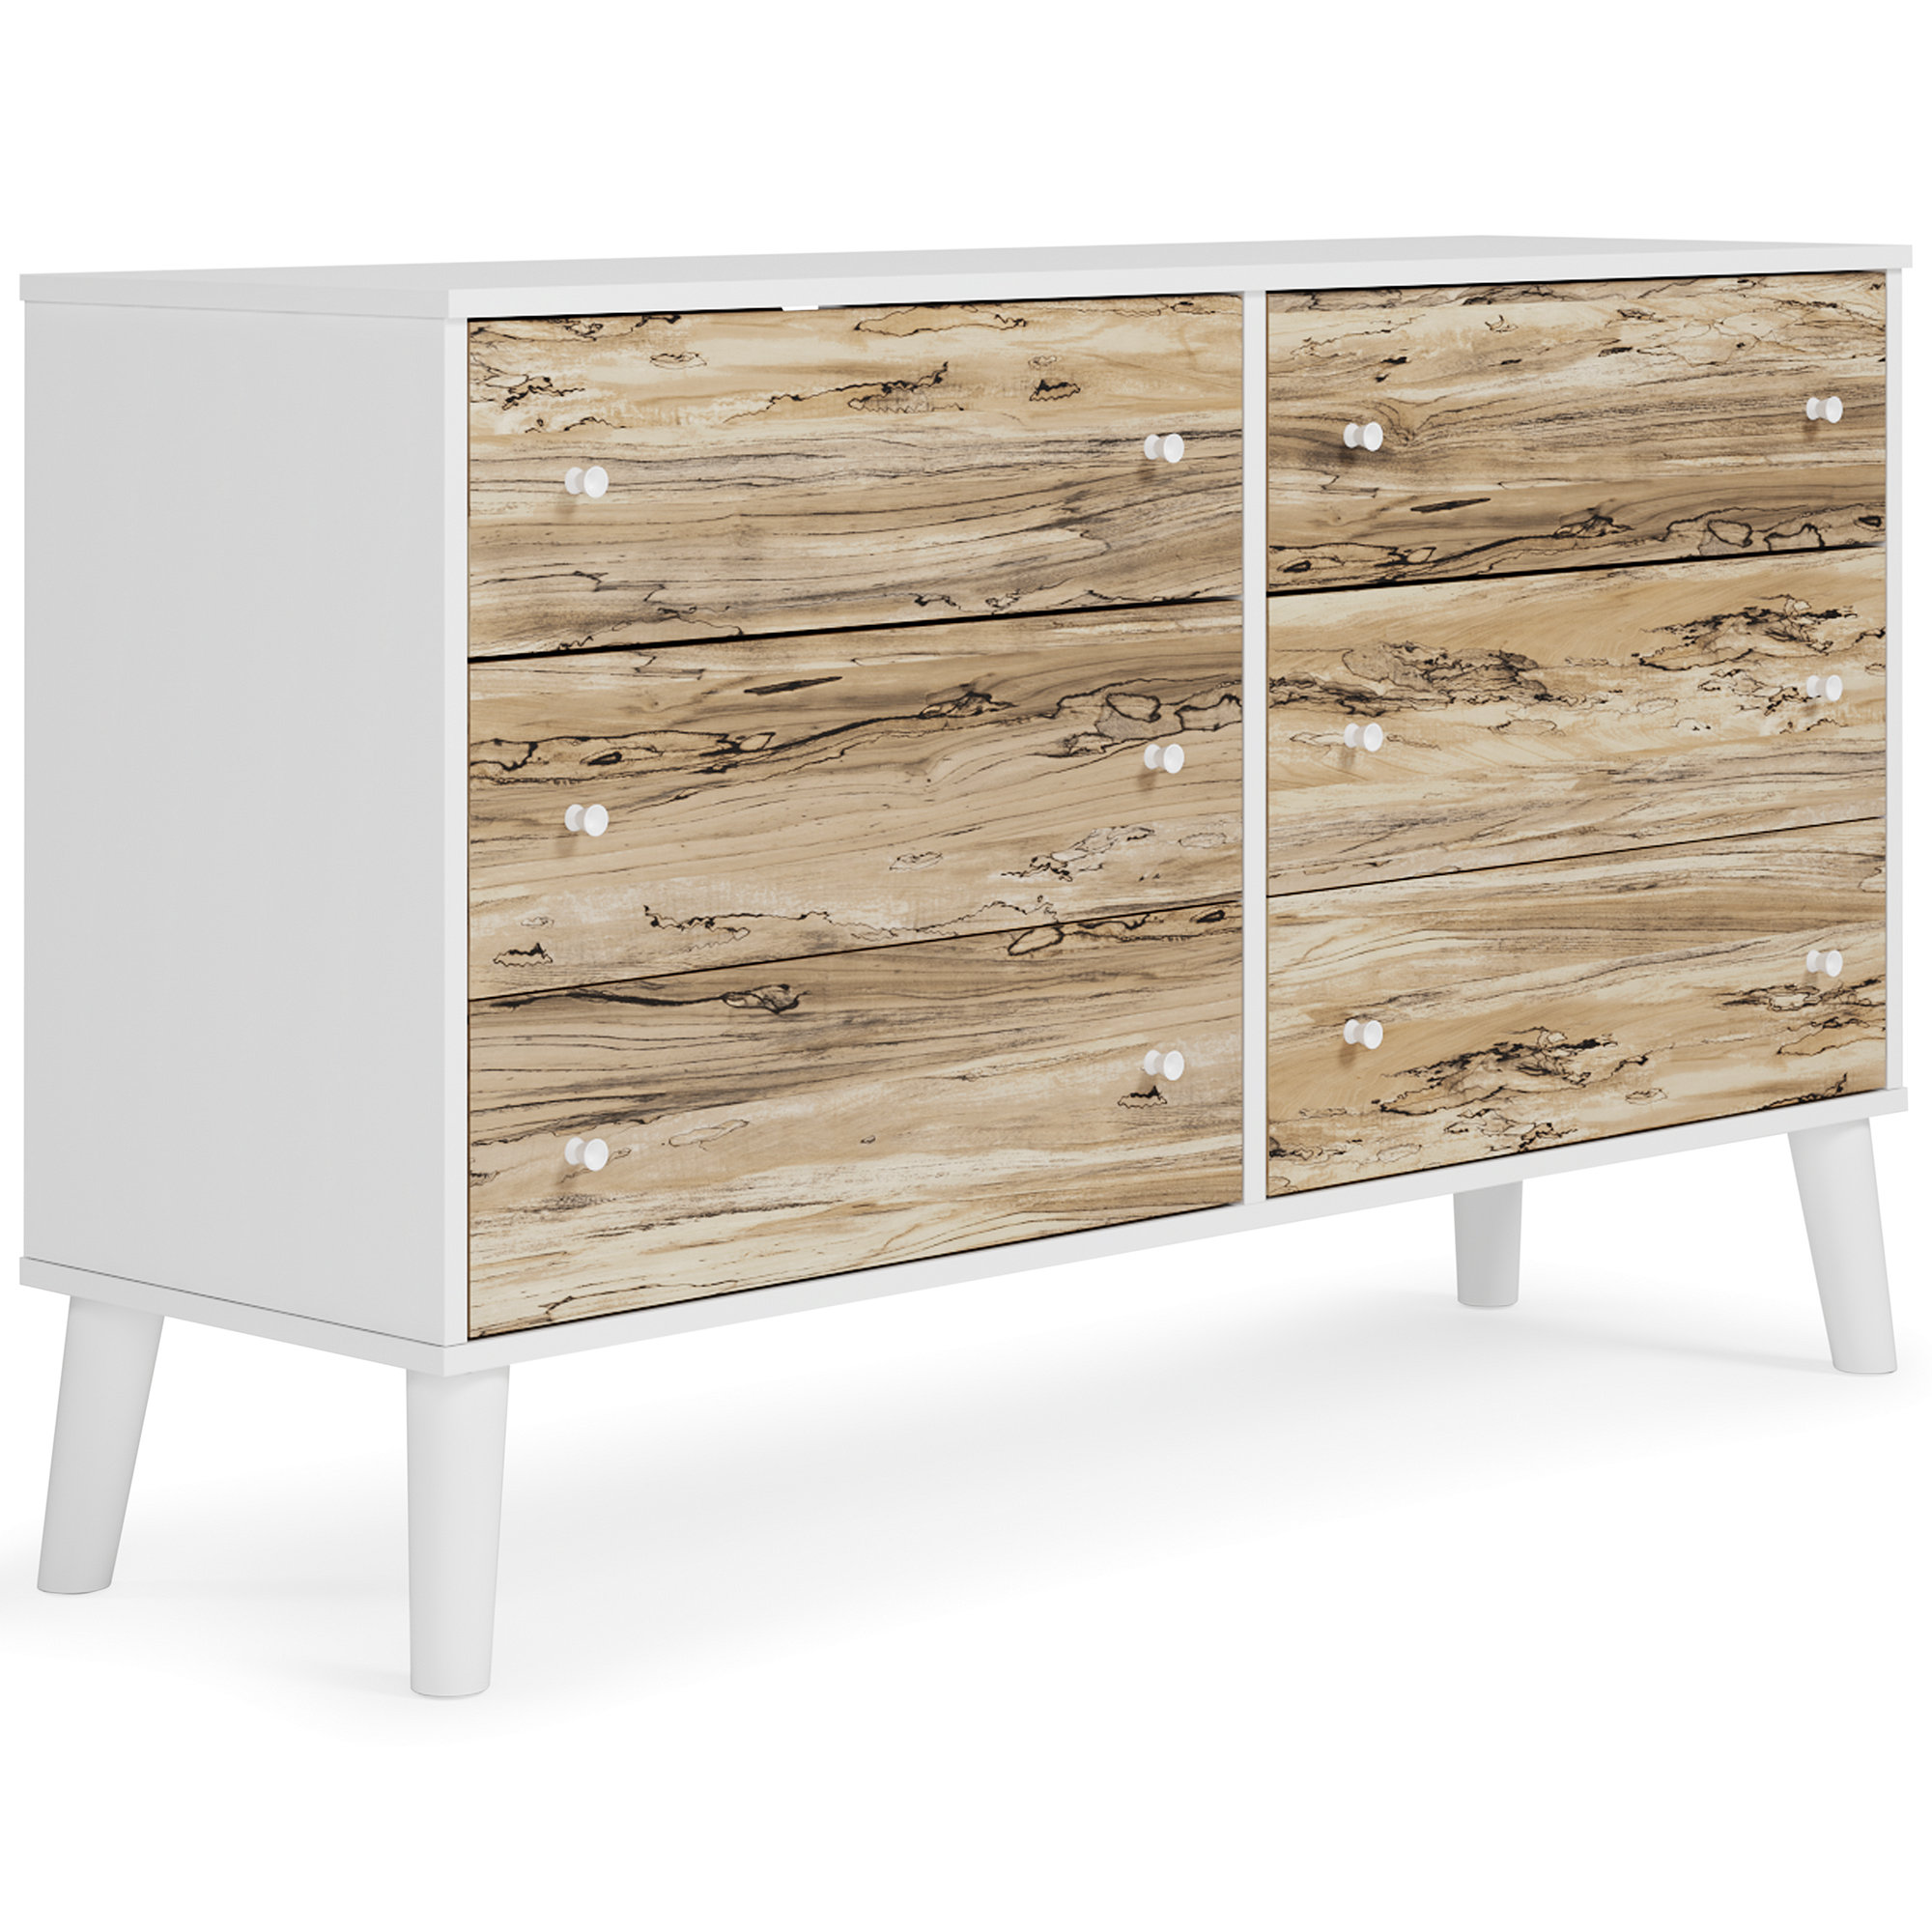 Signature Design by Ashley Contemporary Piperton 6 Drawer Dresser, Two-tone Brown/White - image 1 of 7